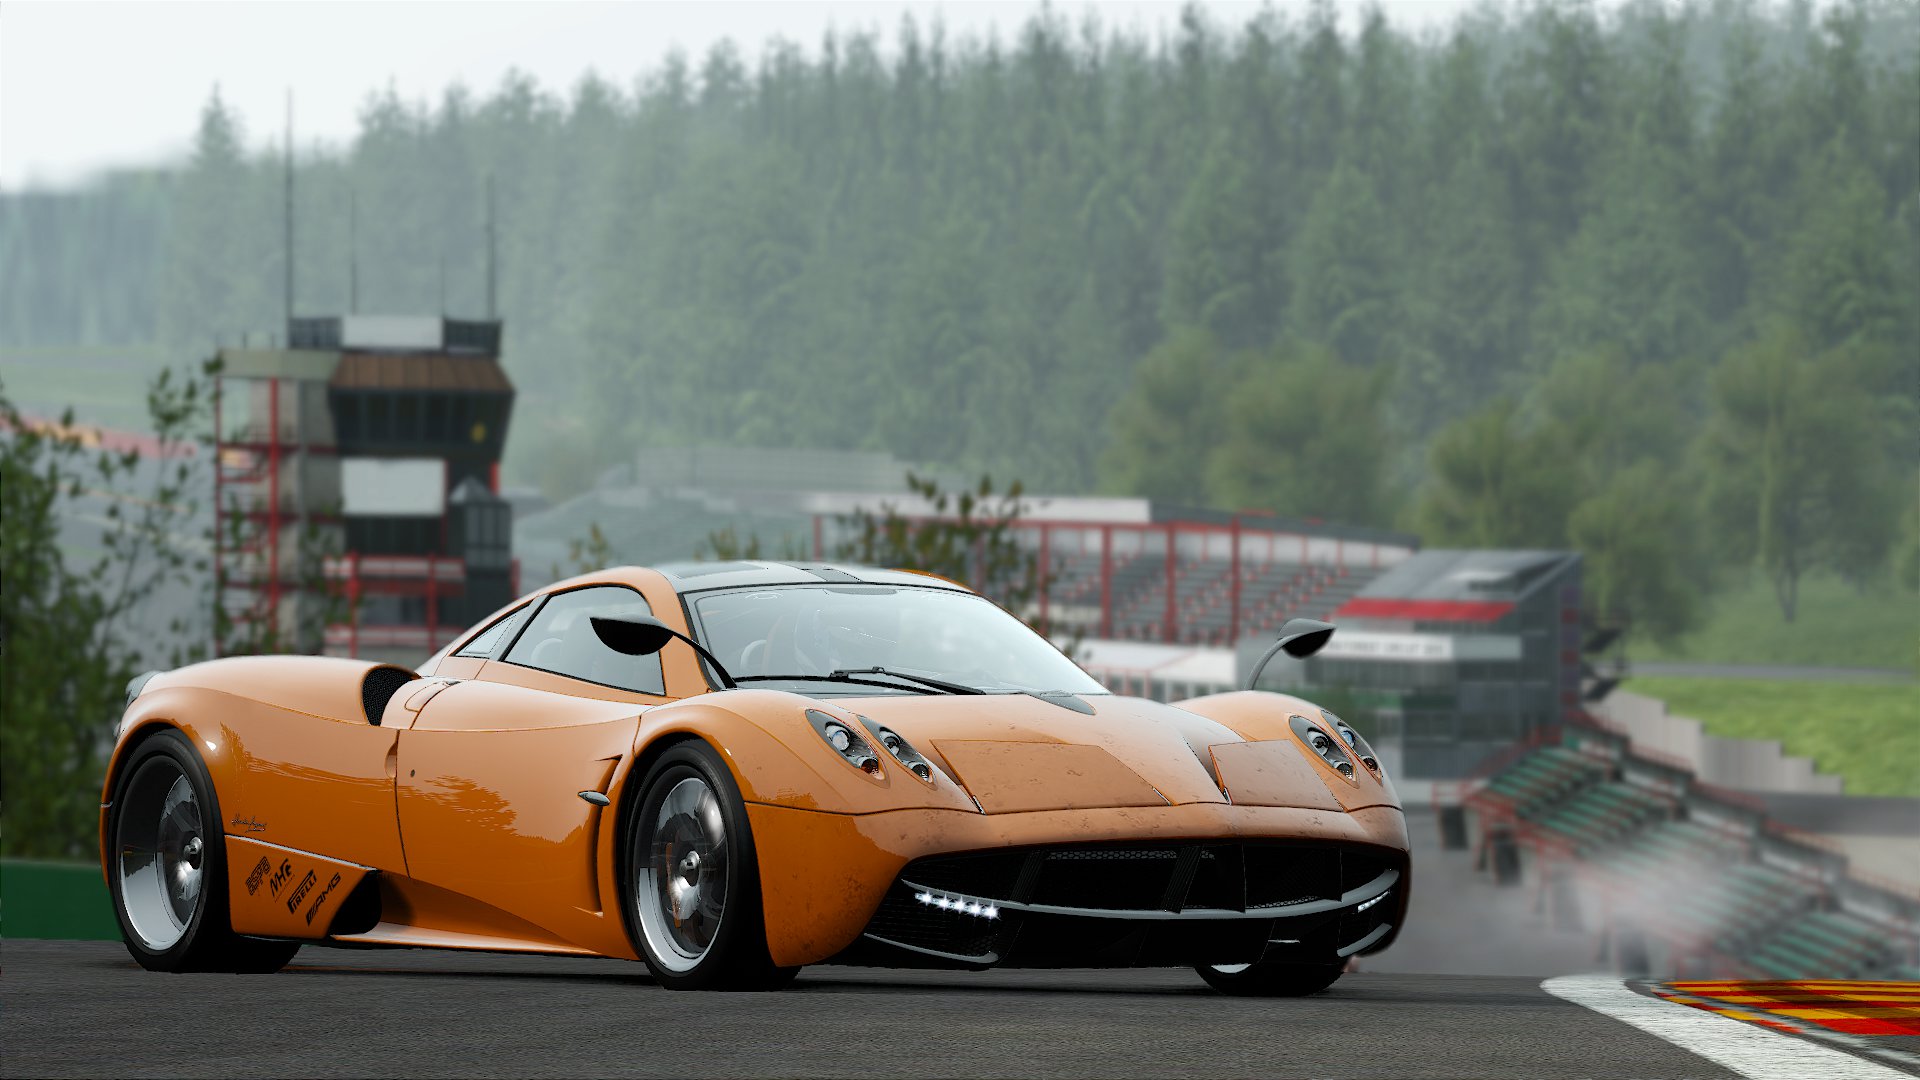 Video: Project Cars – Start Your Engines Trailer